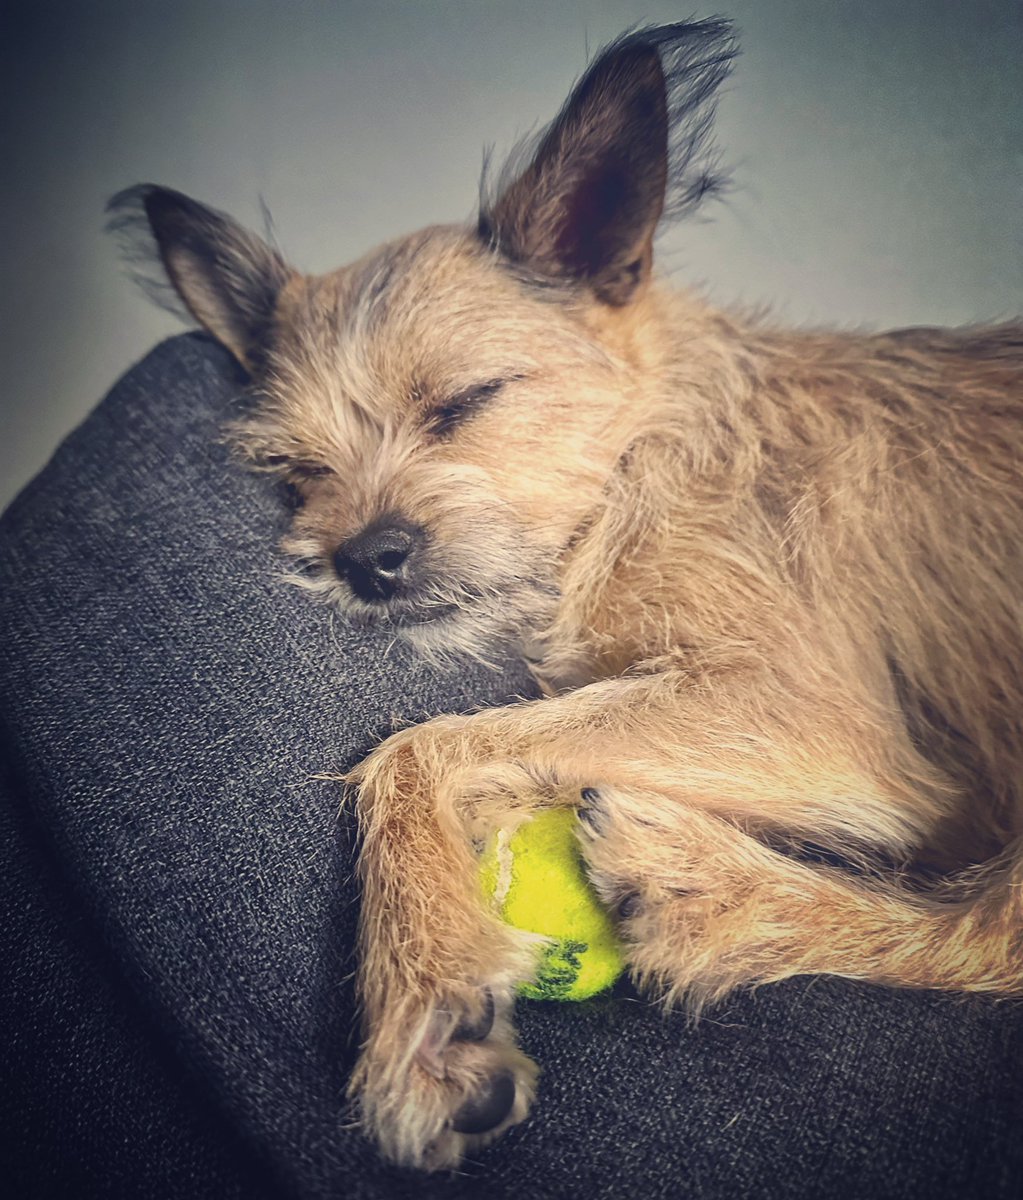 #preciousmoments u never want to forget. My #roxygirl fell asleep with her #kongball 🥰😍🐾
#puppielove
#roxy #dogsoffacebook #chihuahuaterrier #puppylove #puppies #puppy #mypuppy #mypup #mypuppydog #pupper #puppyoftheday #dogowner #doglover #dog #dogs #dogmom #dogmomlife